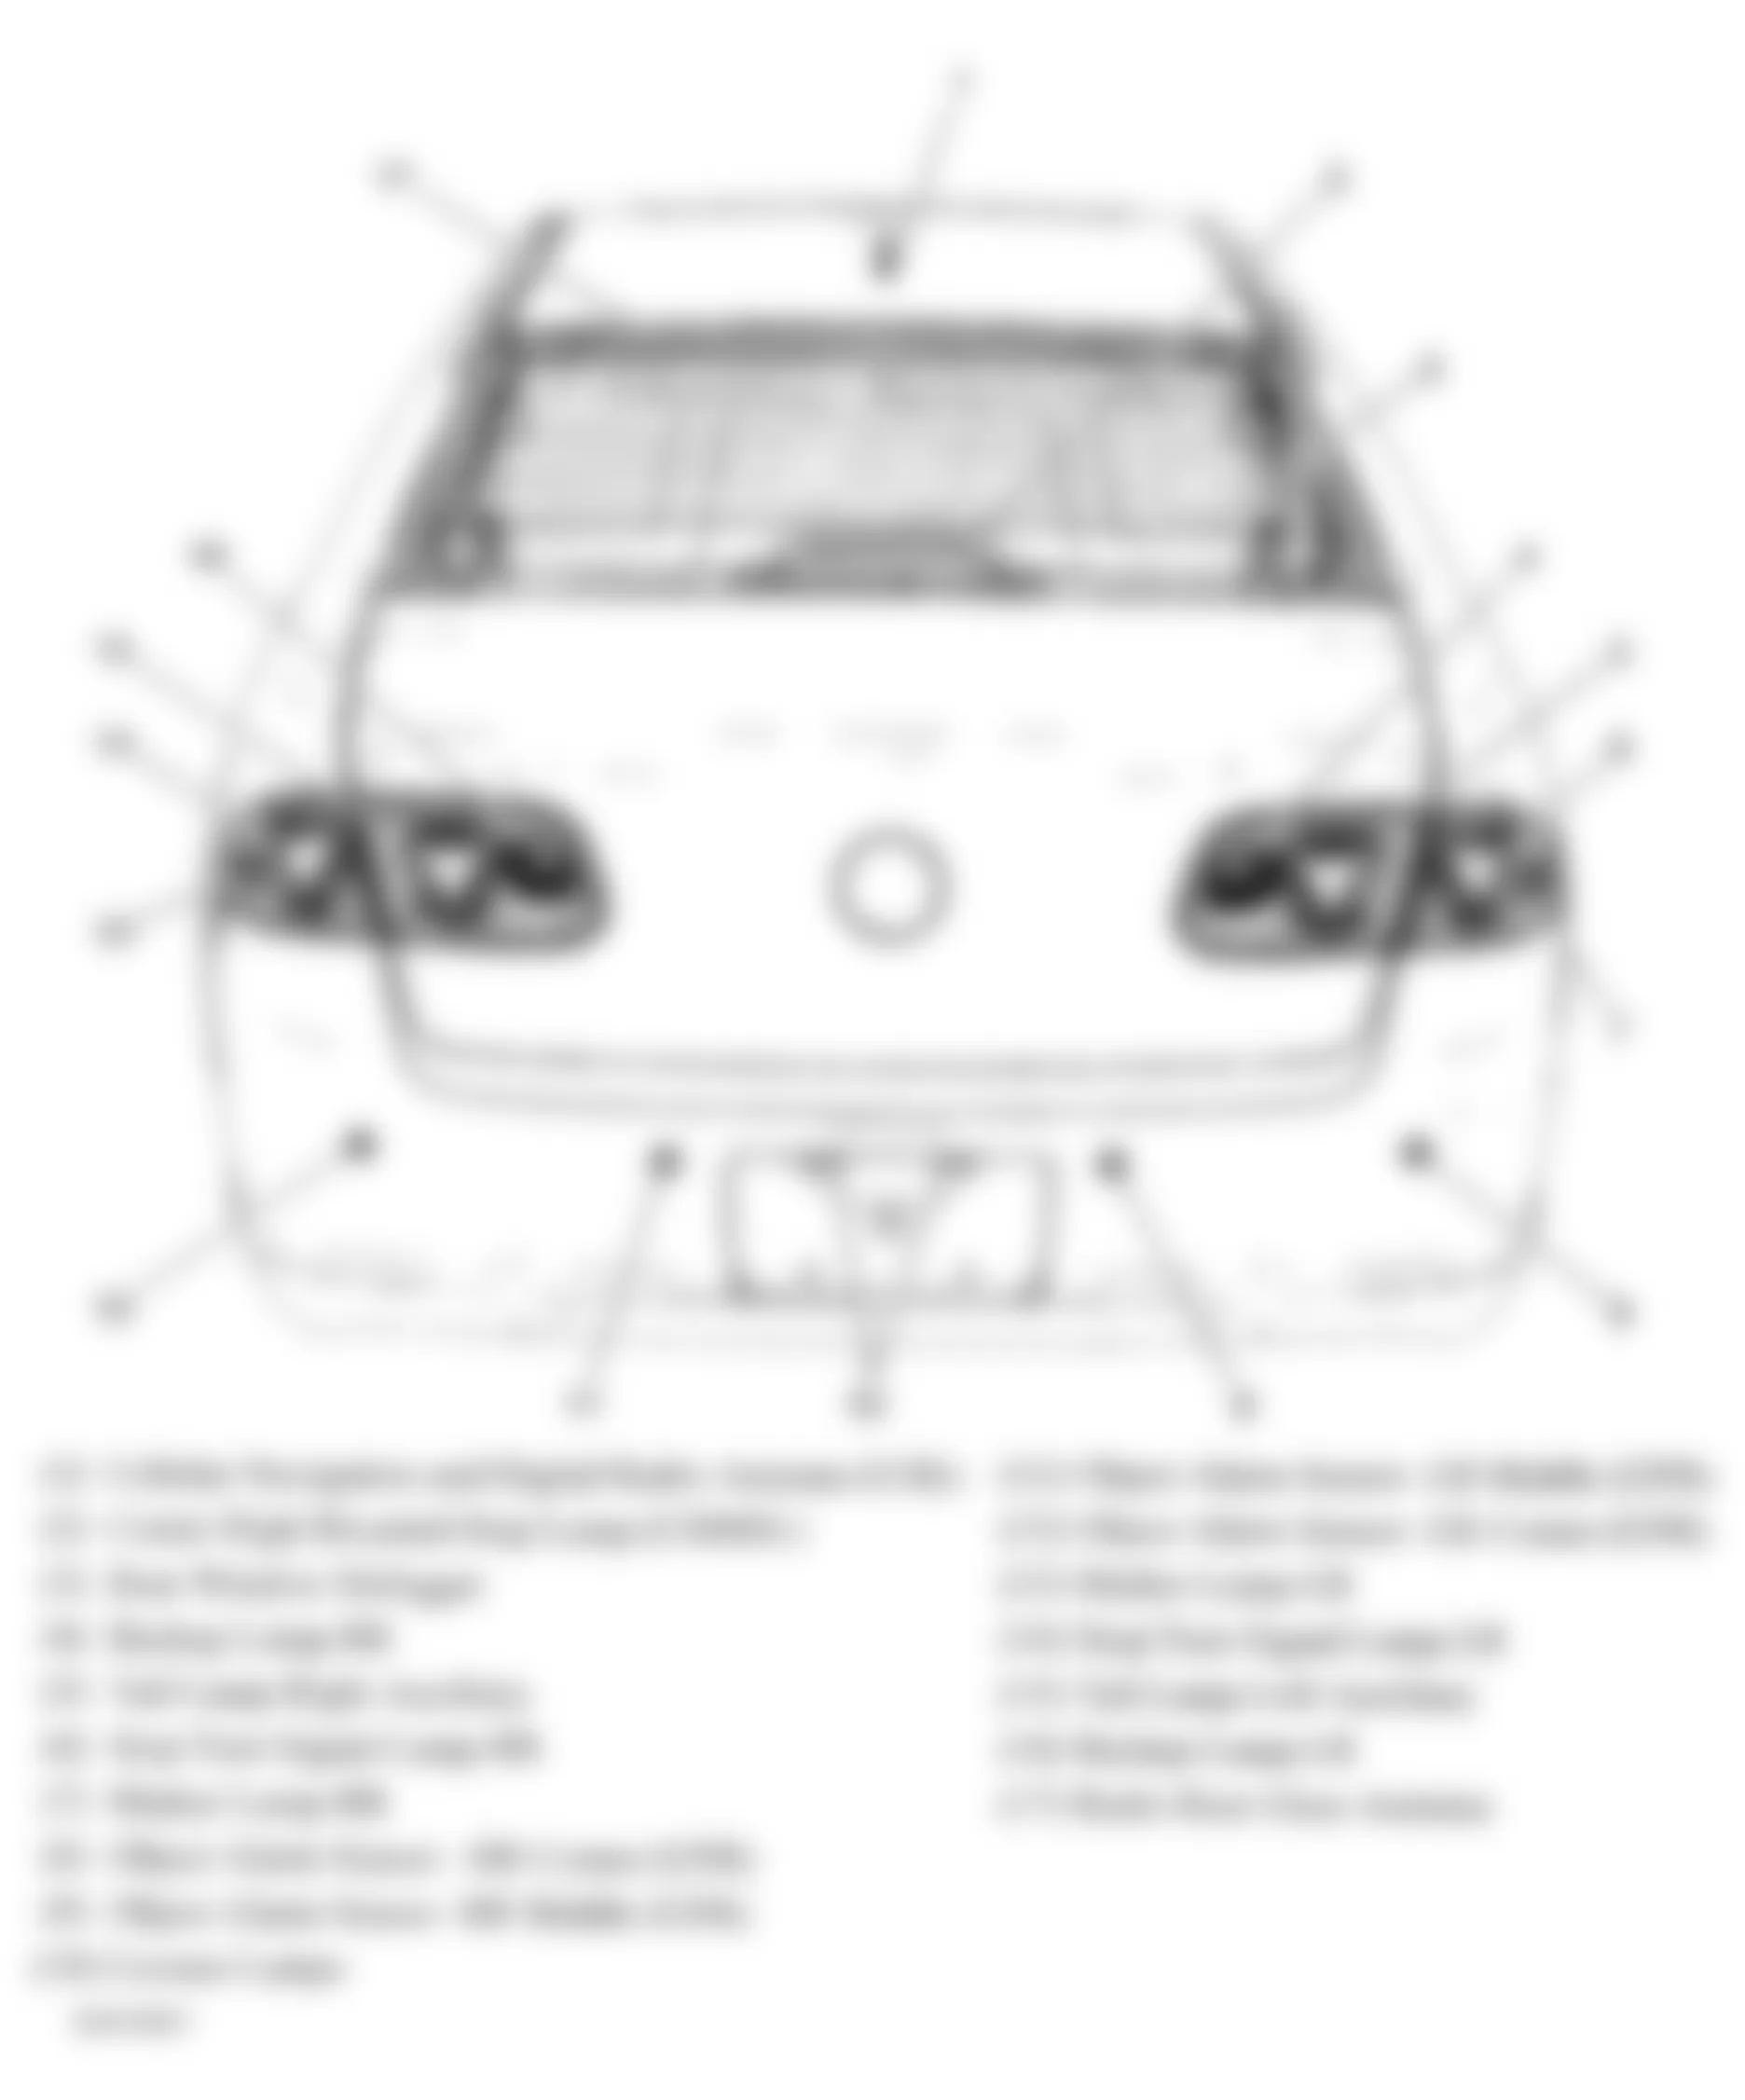 Buick Lucerne Super 2008 - Component Locations -  Rear Of Vehicle